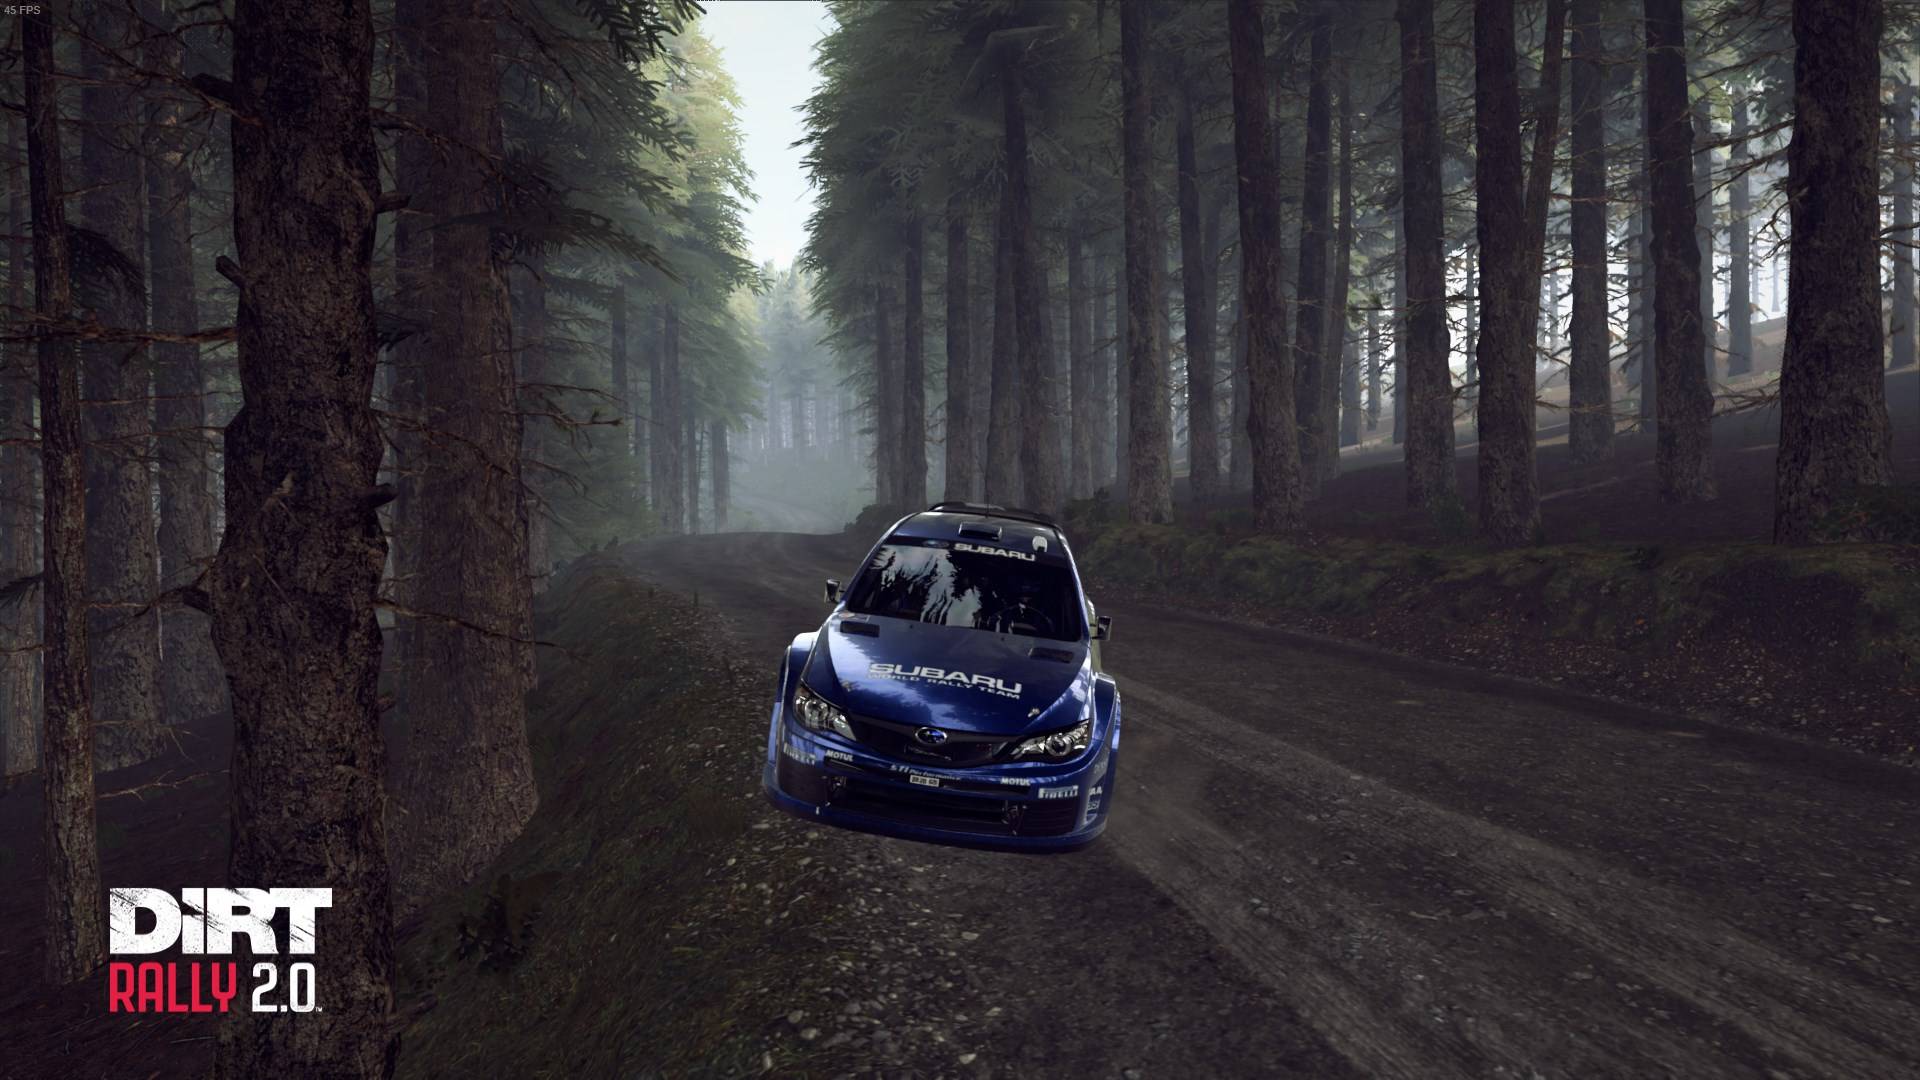 RCL Beginner DirtRally2.0 (Wales) 2000cc